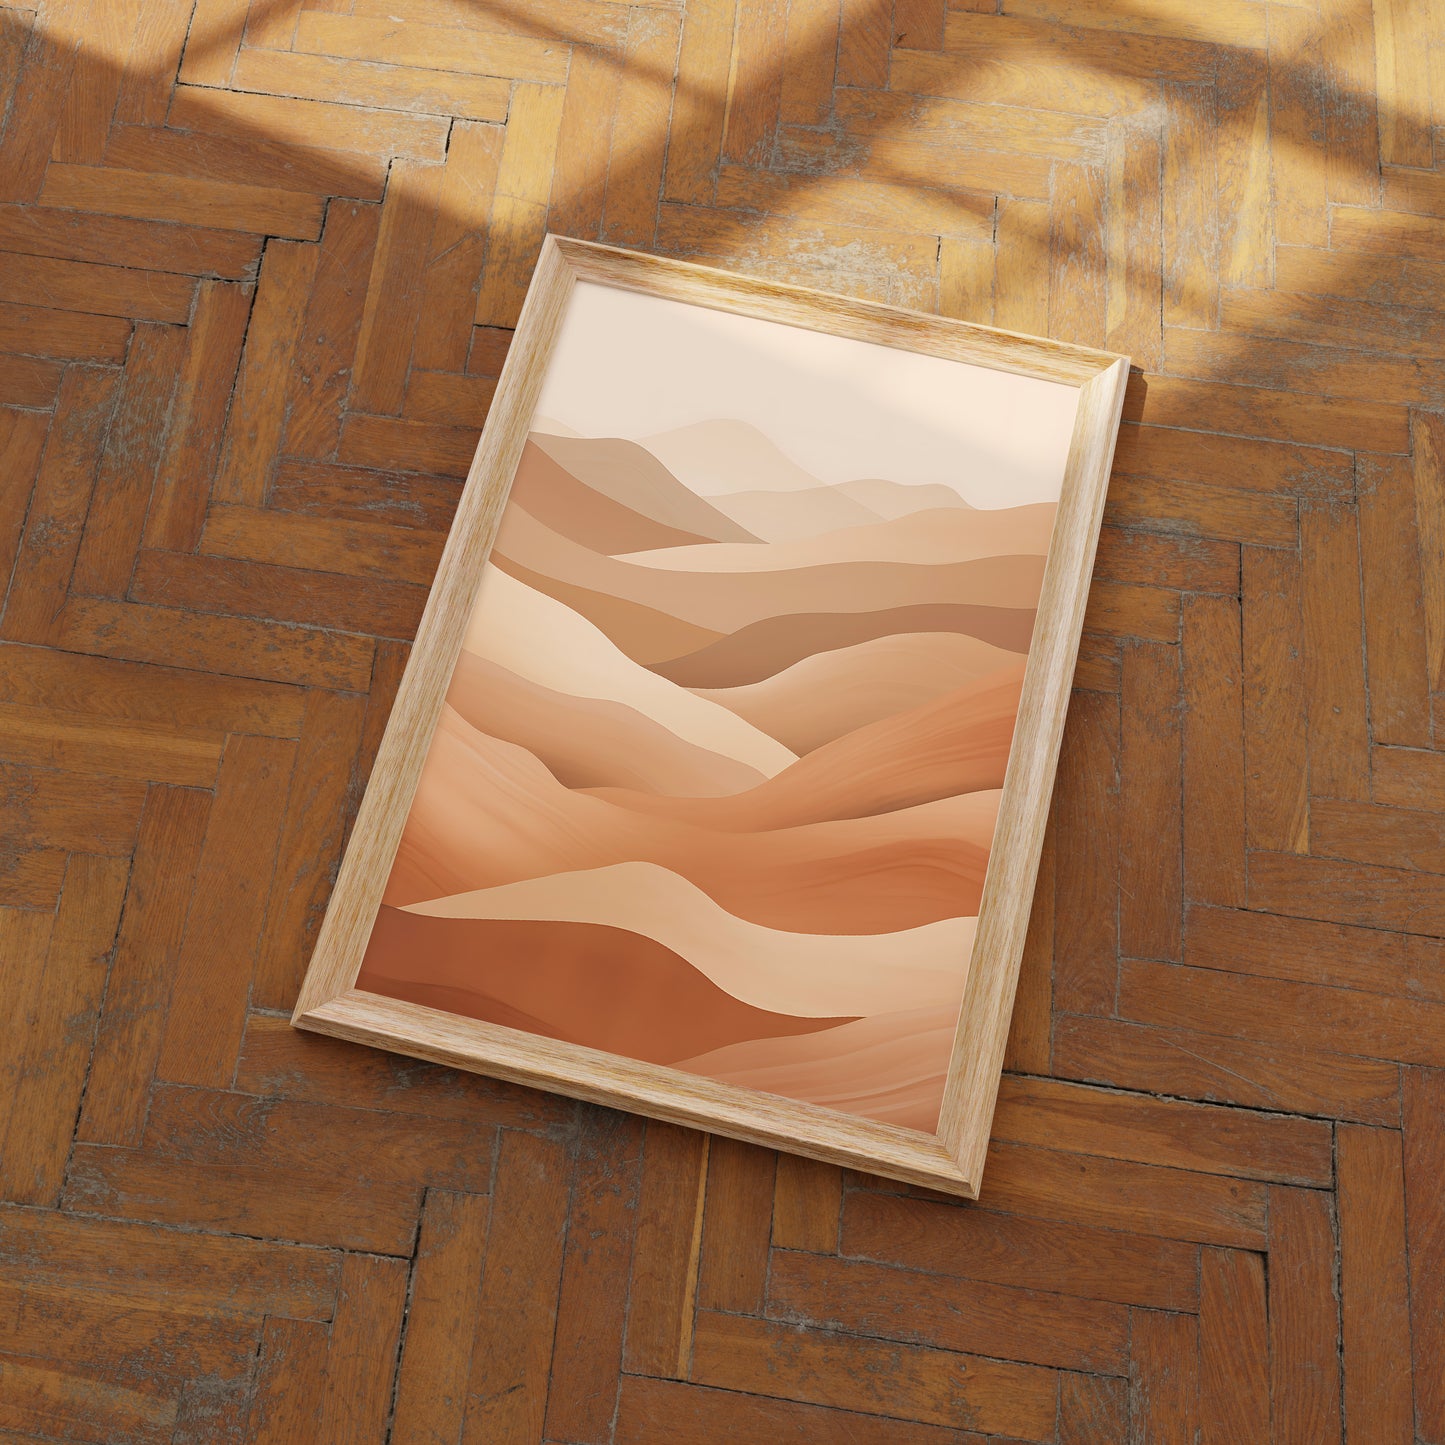 A framed abstract desert landscape painting leaning on a herringbone wood floor.